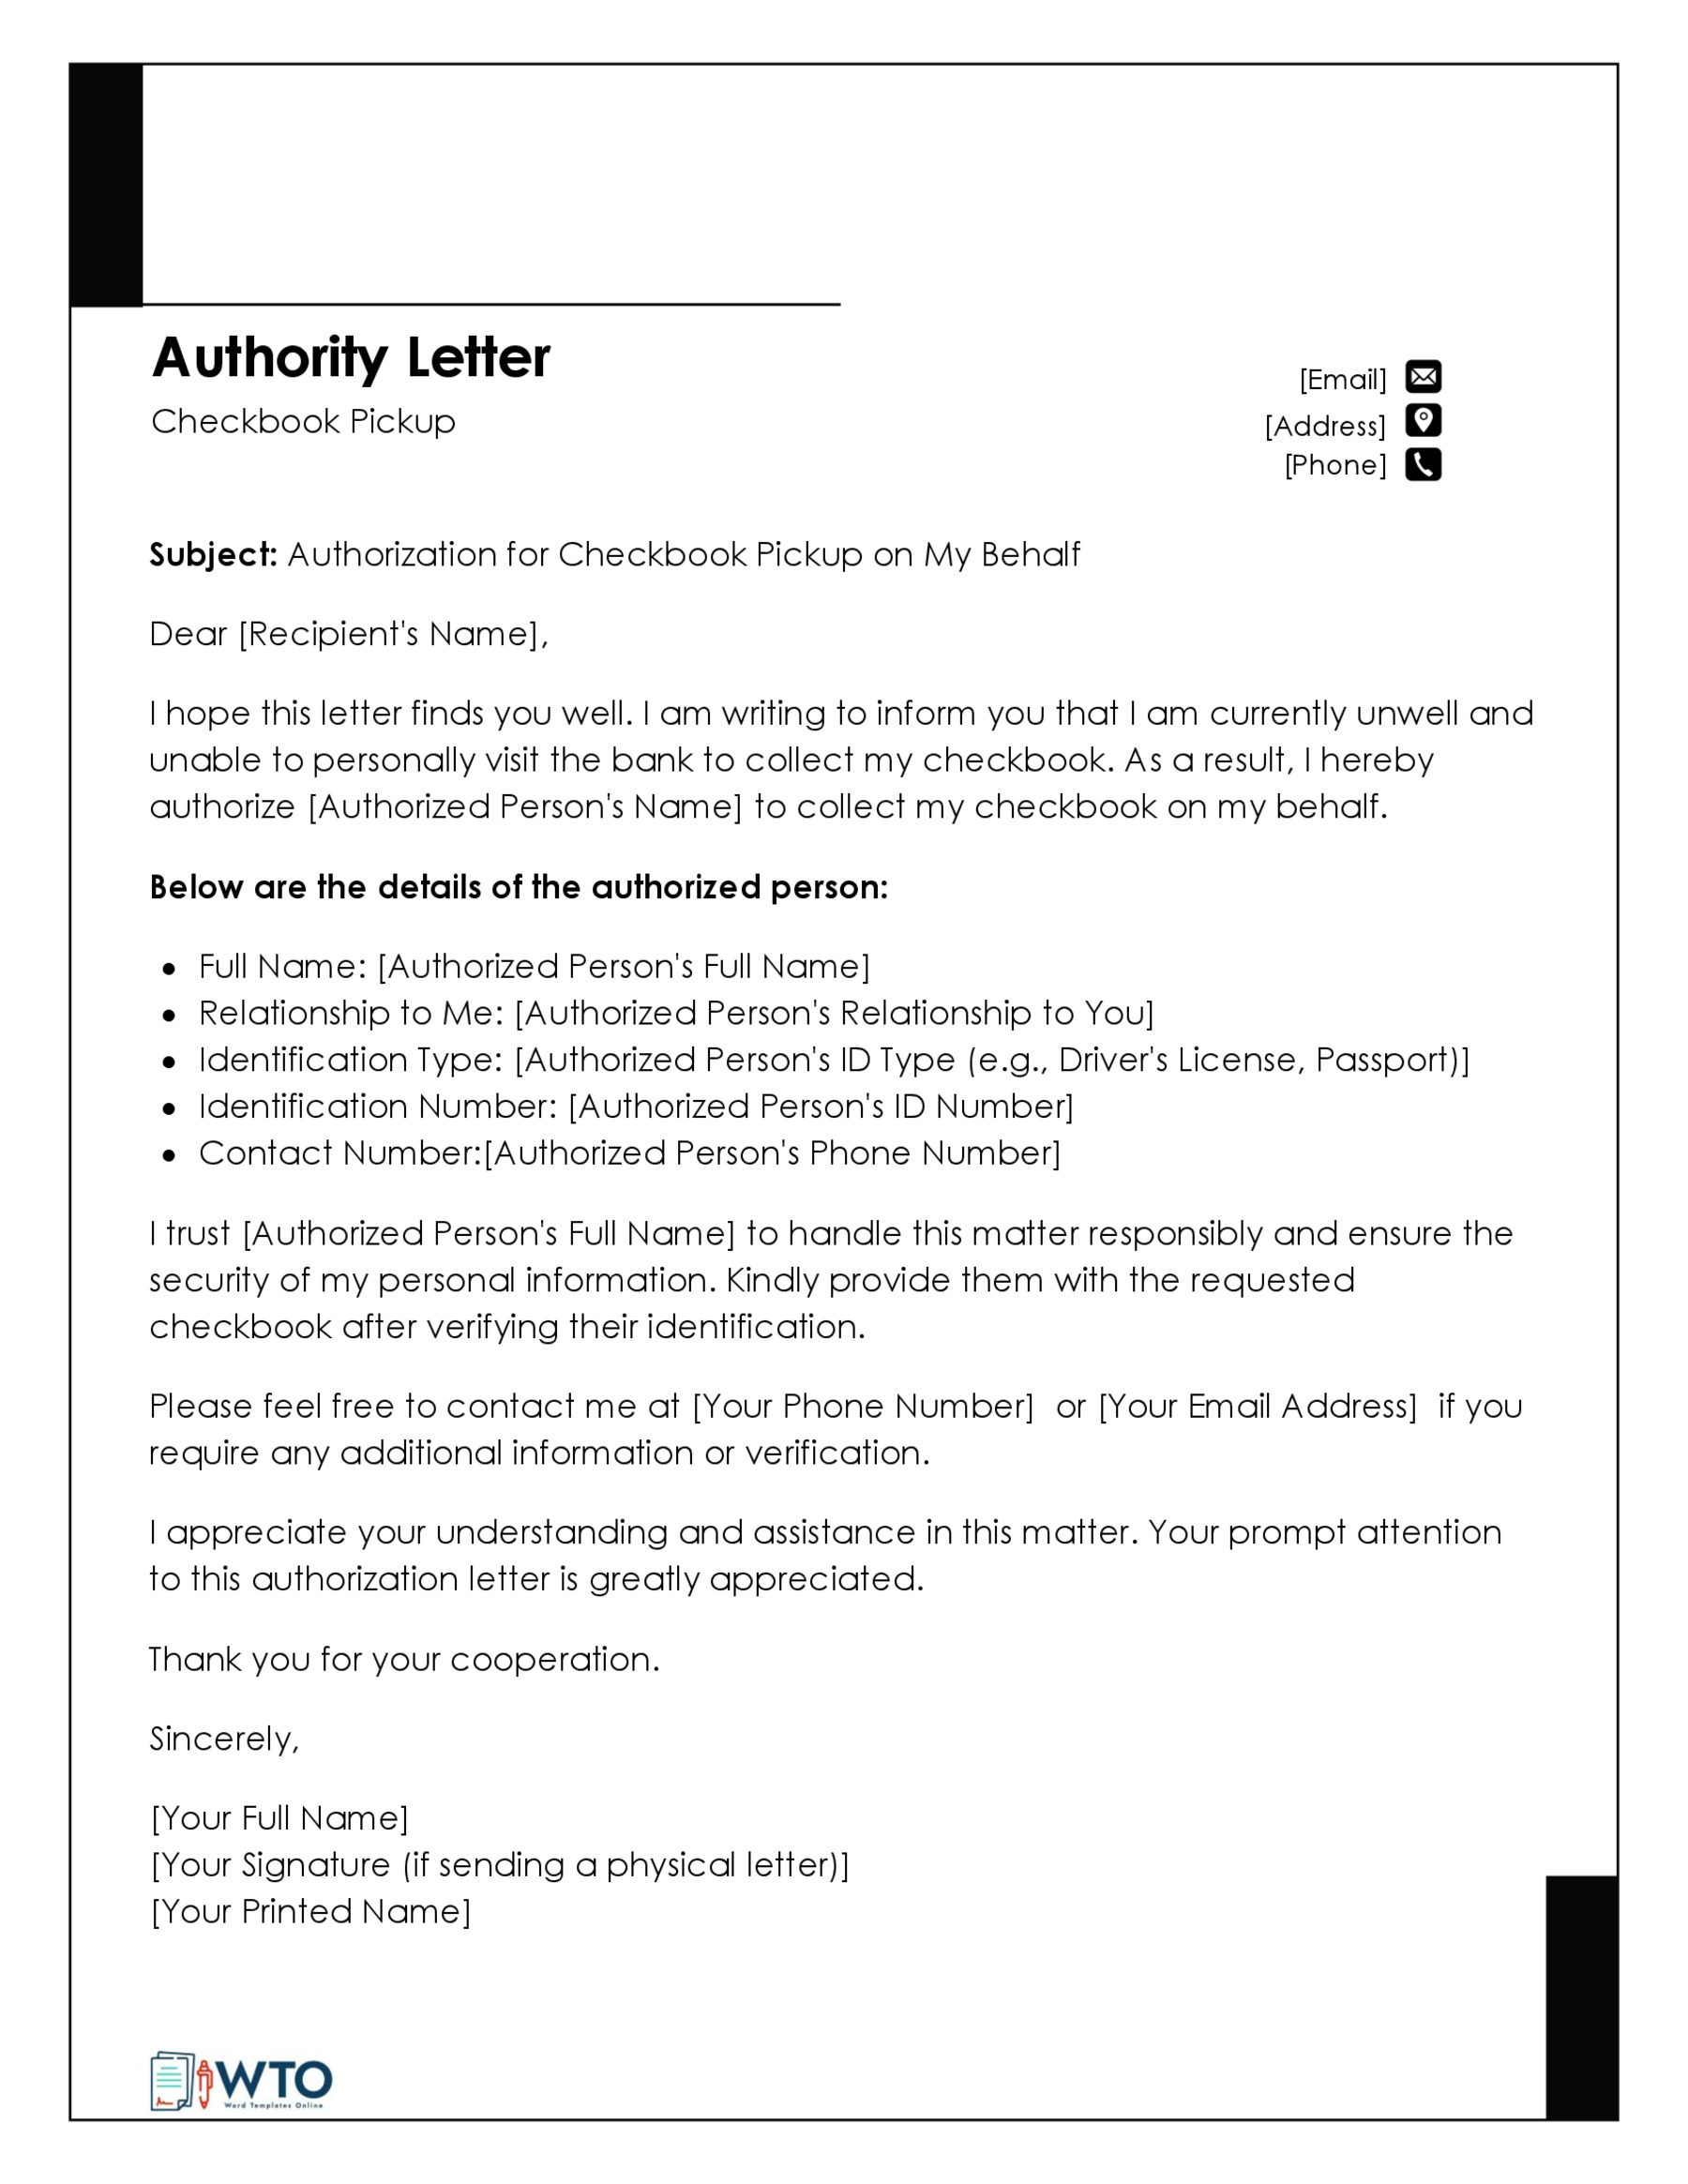 Writing an Authorization Letter for Checkbook Pickup Template-Ms word Format